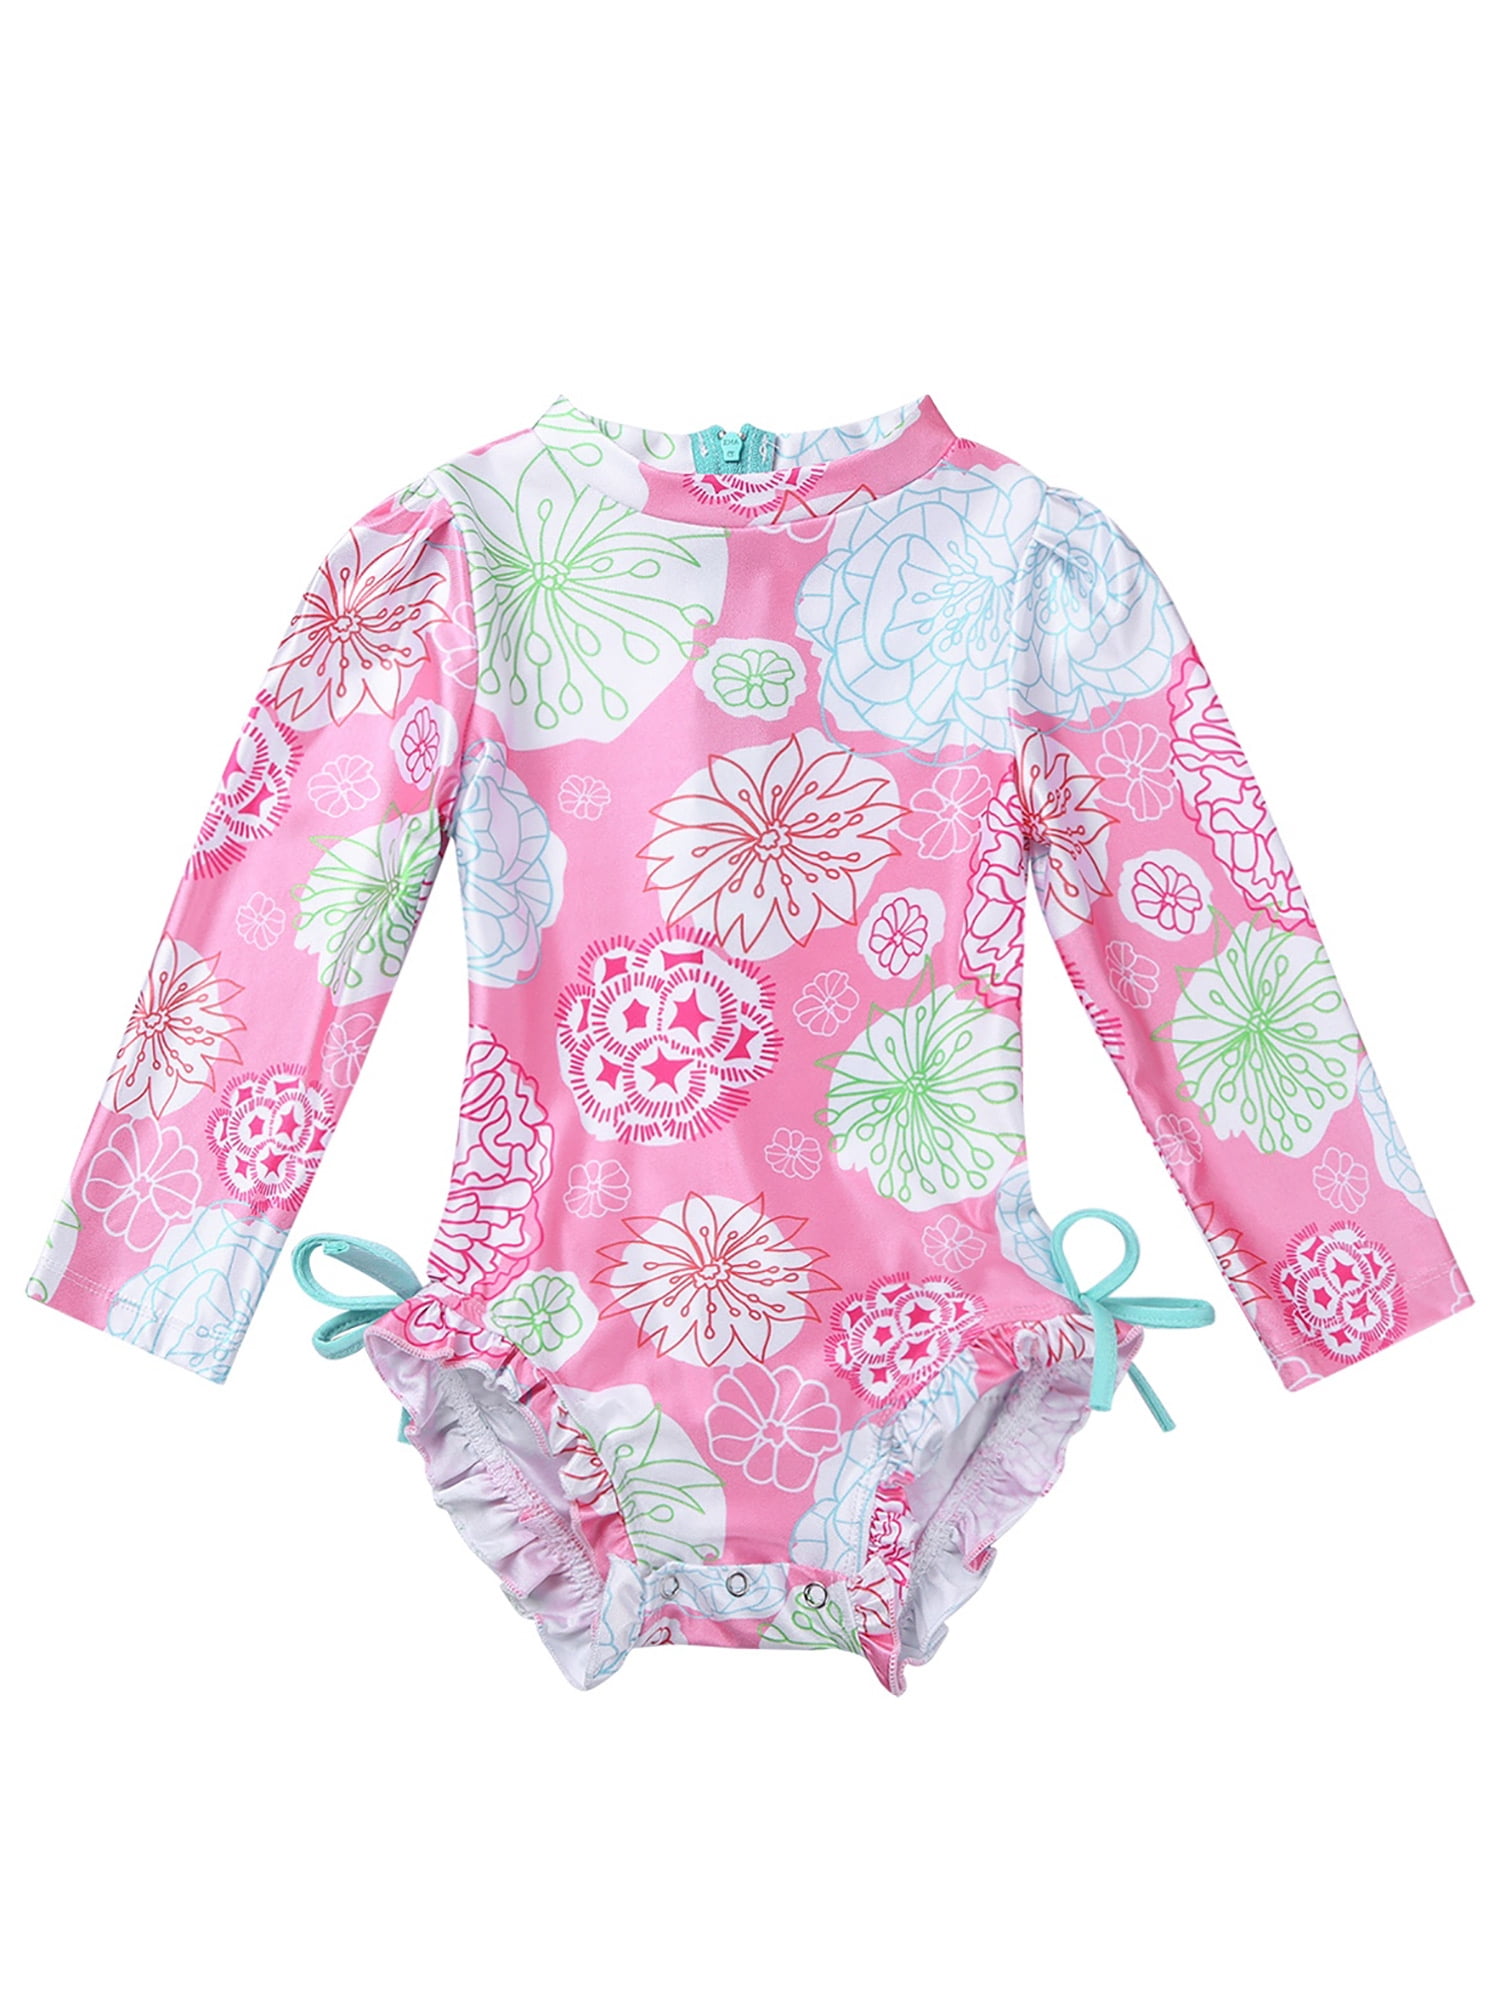 iEFiEL Baby Girls One-piece Floral Rash Guard Swimsuit Bathing Suit ...